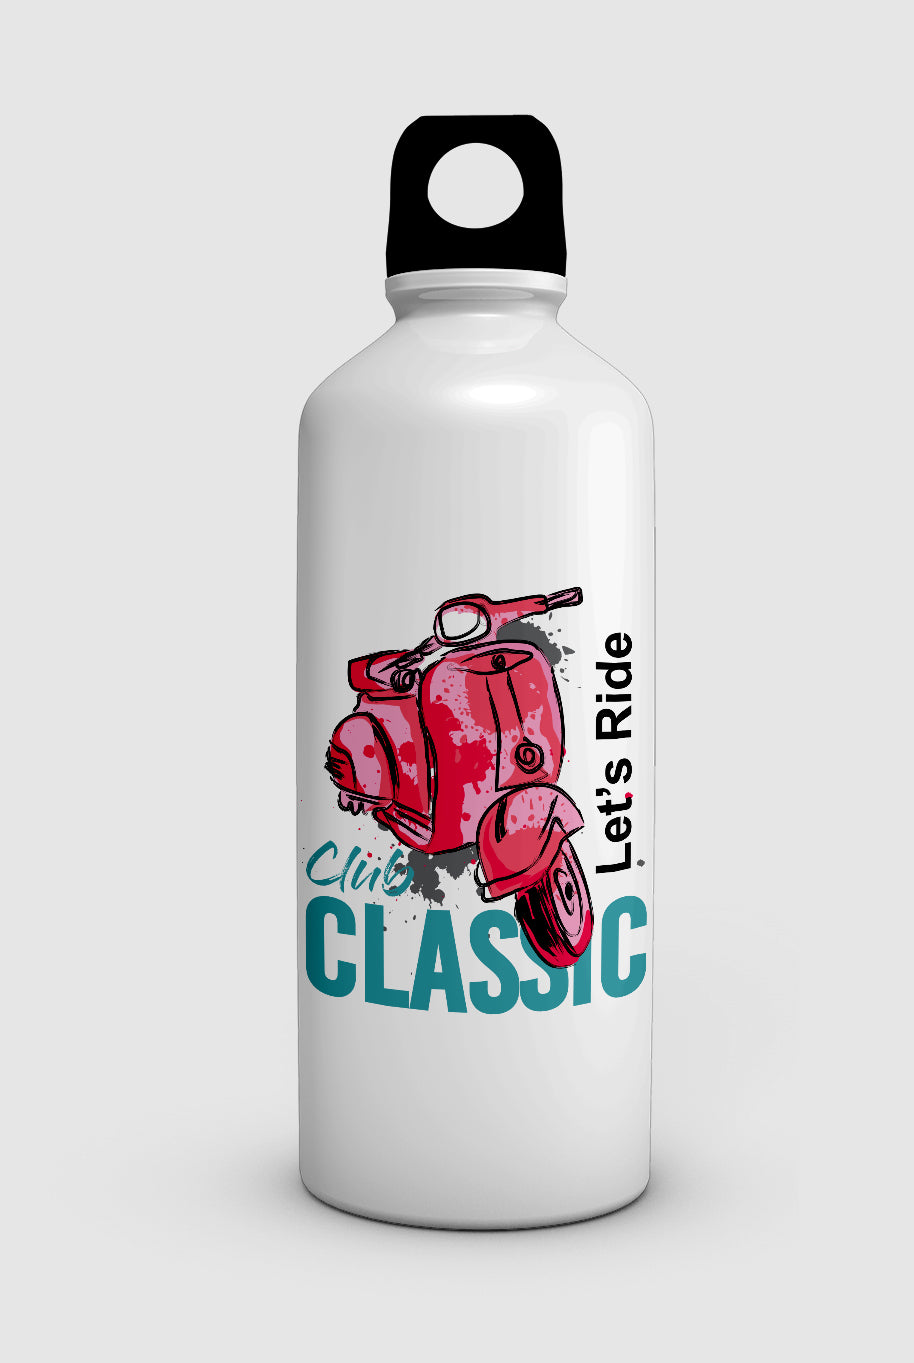 "CLUB CLASSIC LET'S RIDE" water bottle